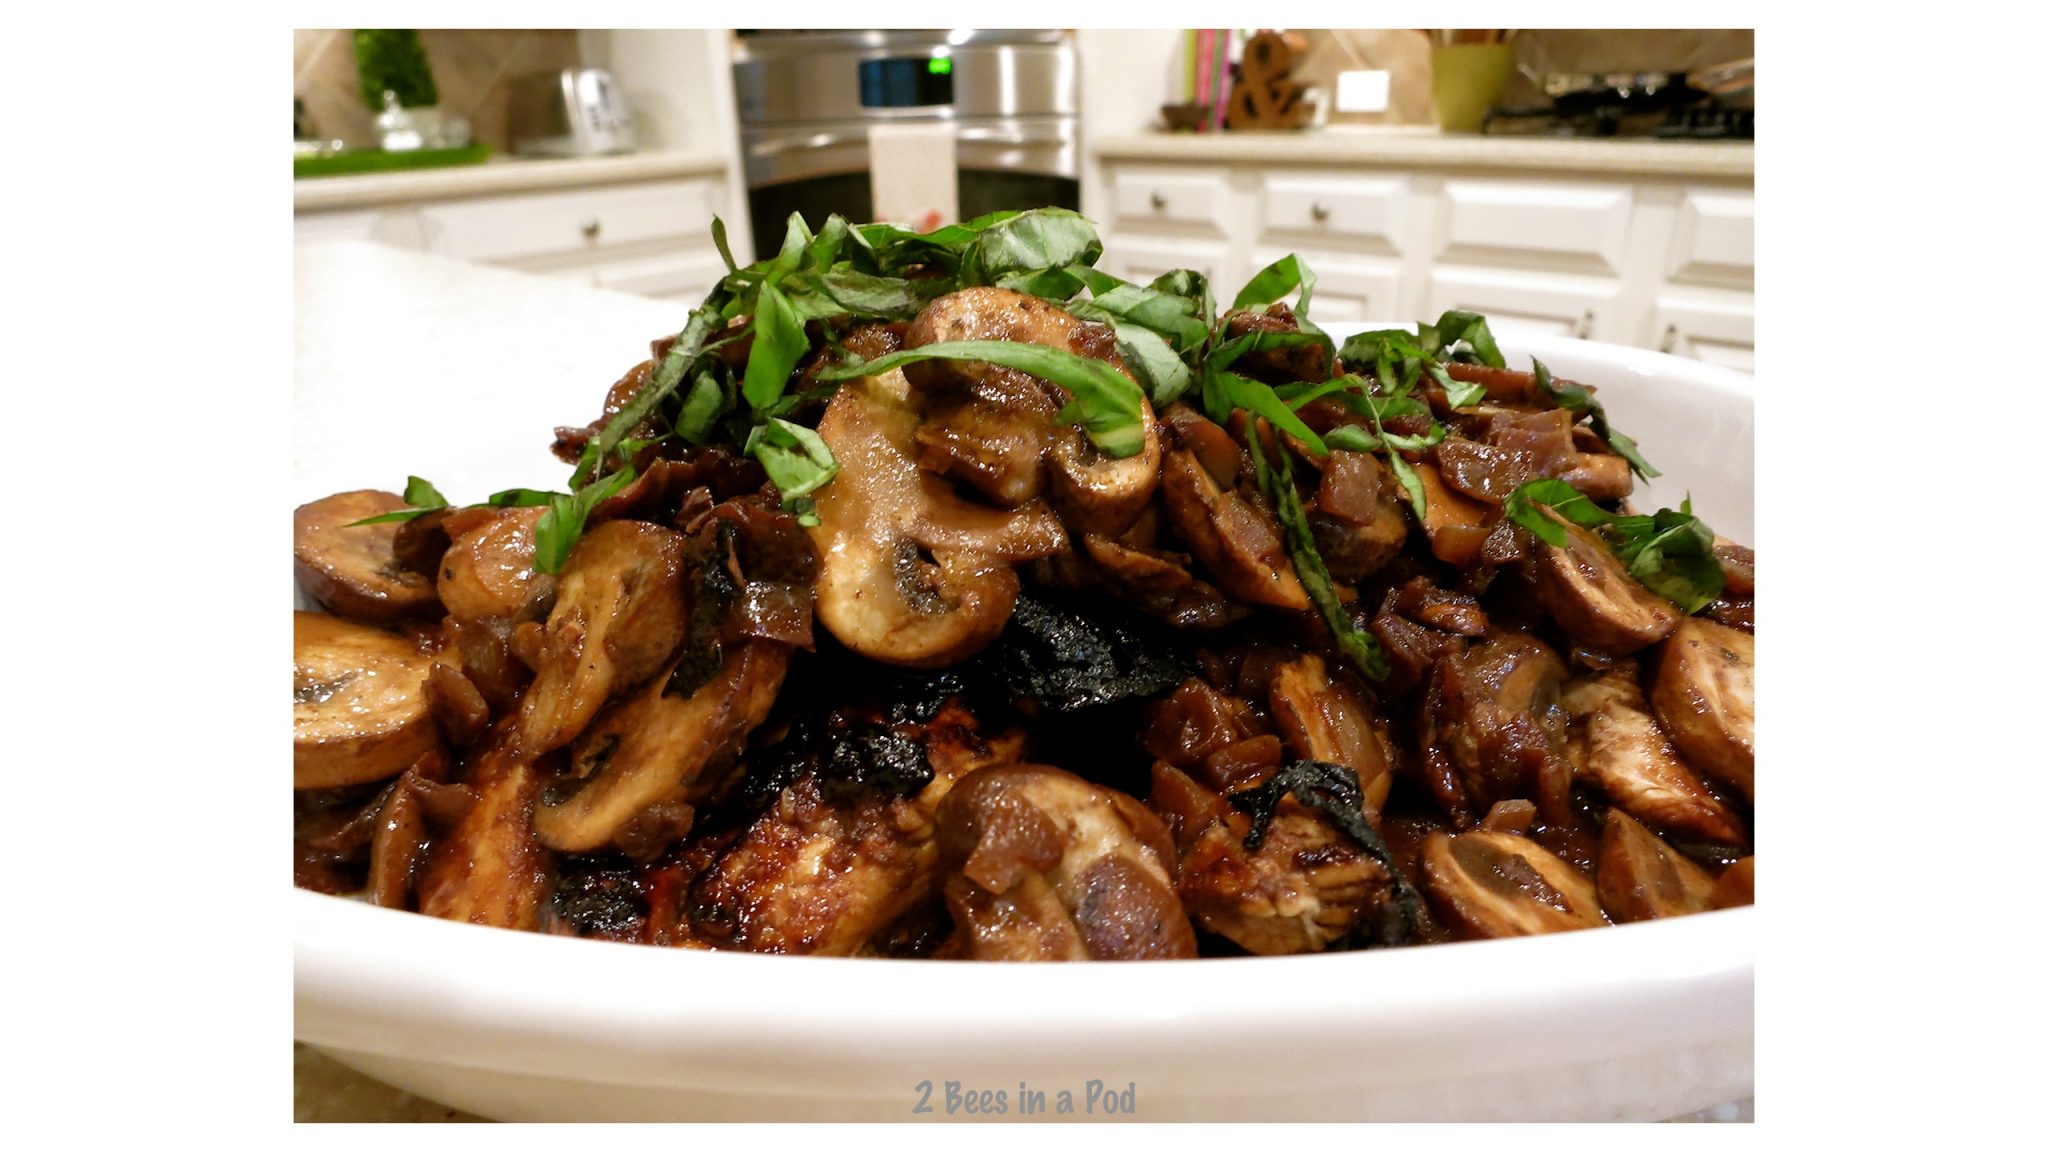 Balsamic Chicken with Mushrooms - I can't believe it's Weight Watchers